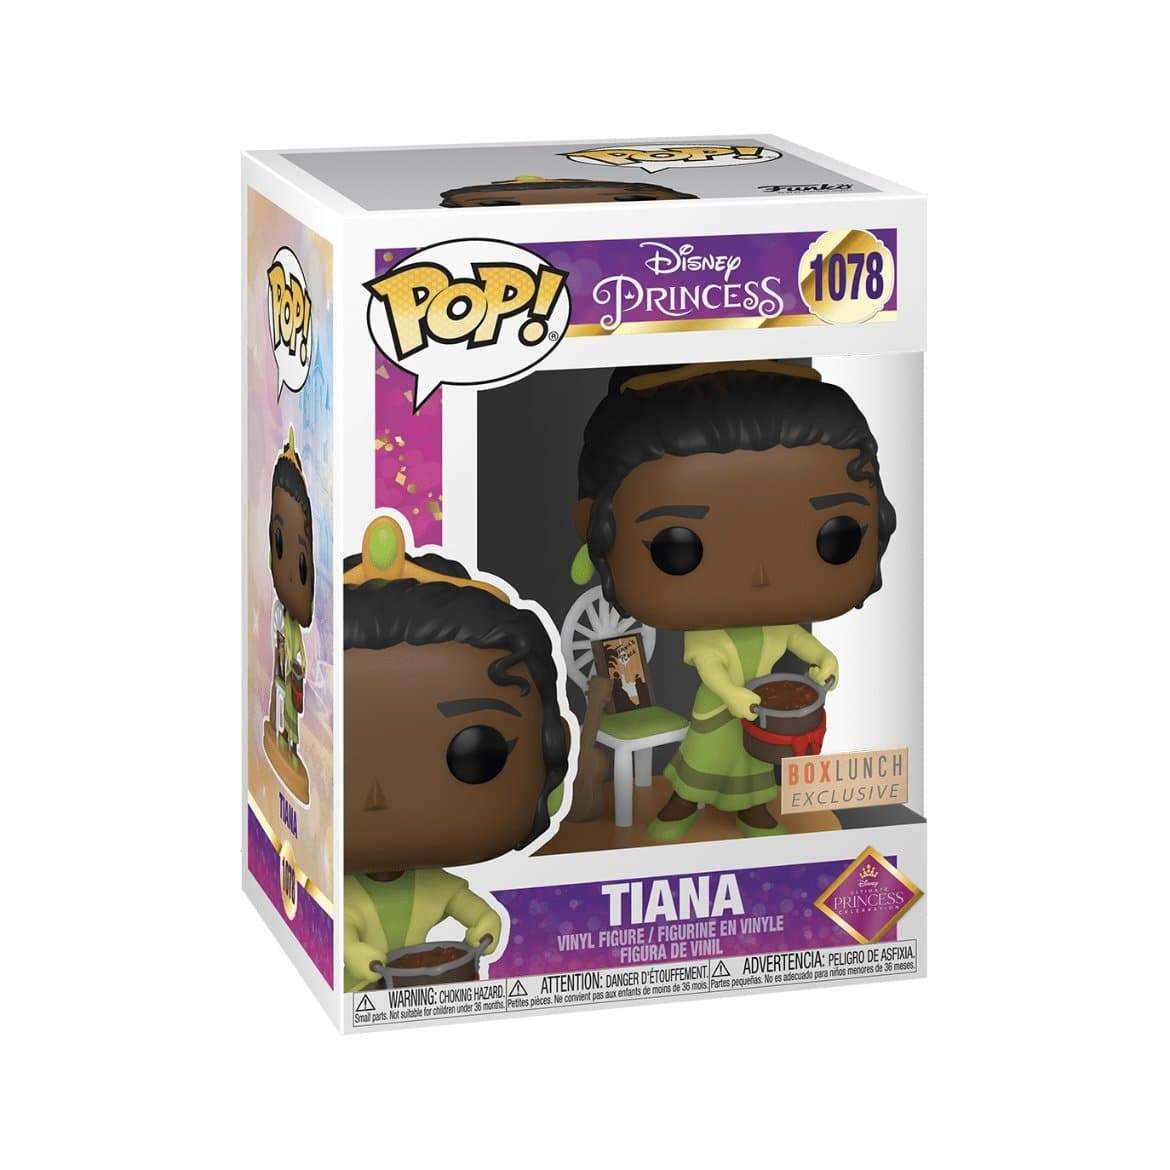 Tiana #1078 Funko Pop! - Disney Princess - Box Lunch Exclusive - Angry Cat